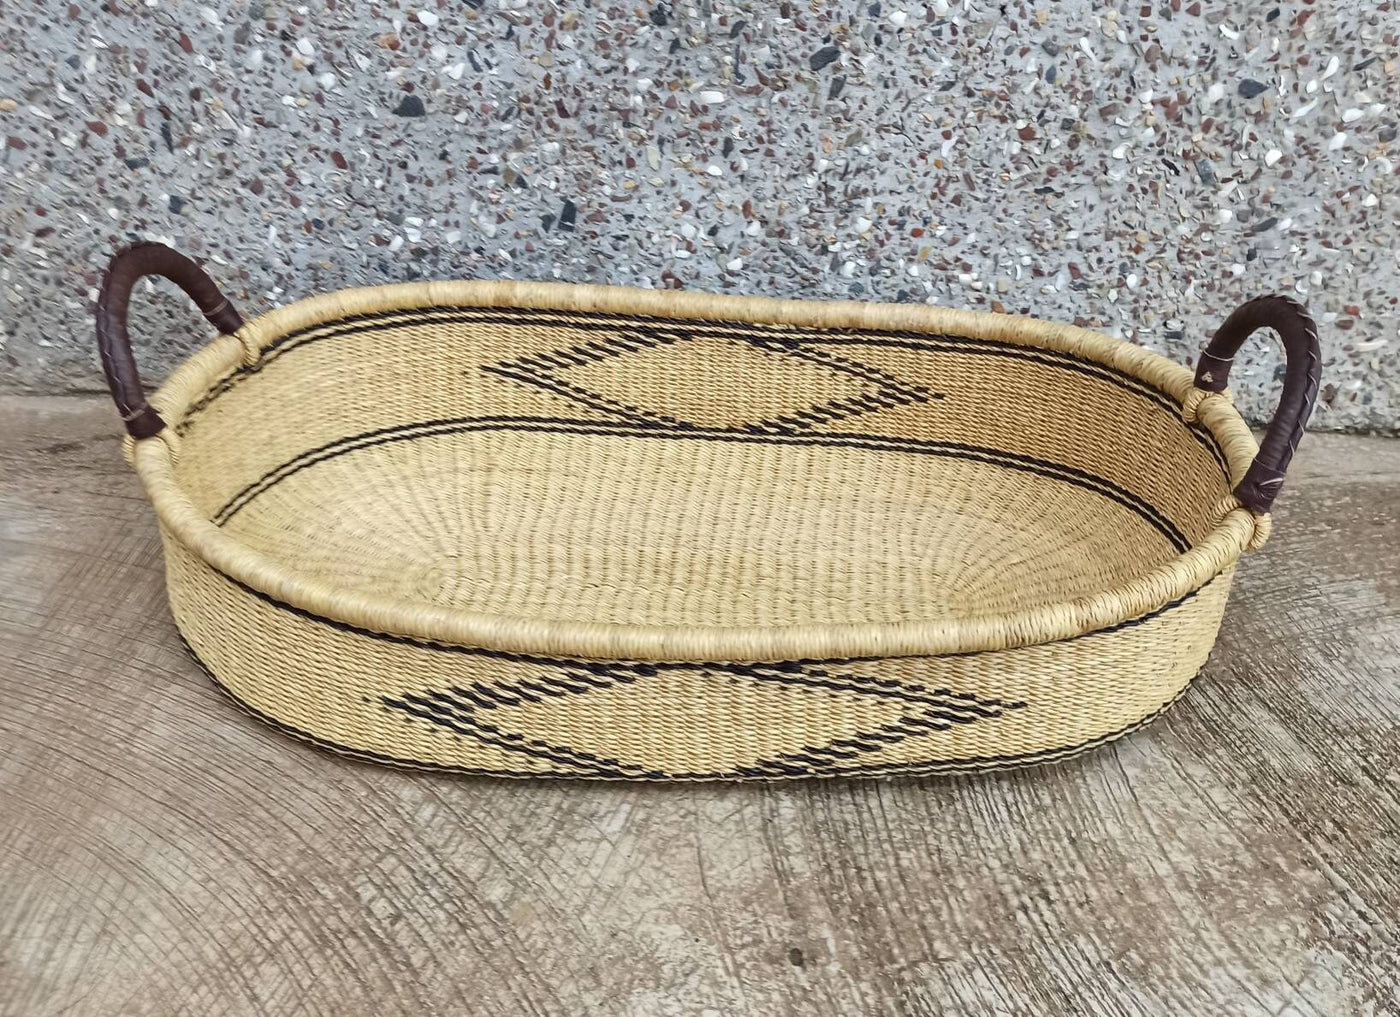 Baby Moses For Baby | Changing Basket | Baby Changing Basket - AfricanheritageGH